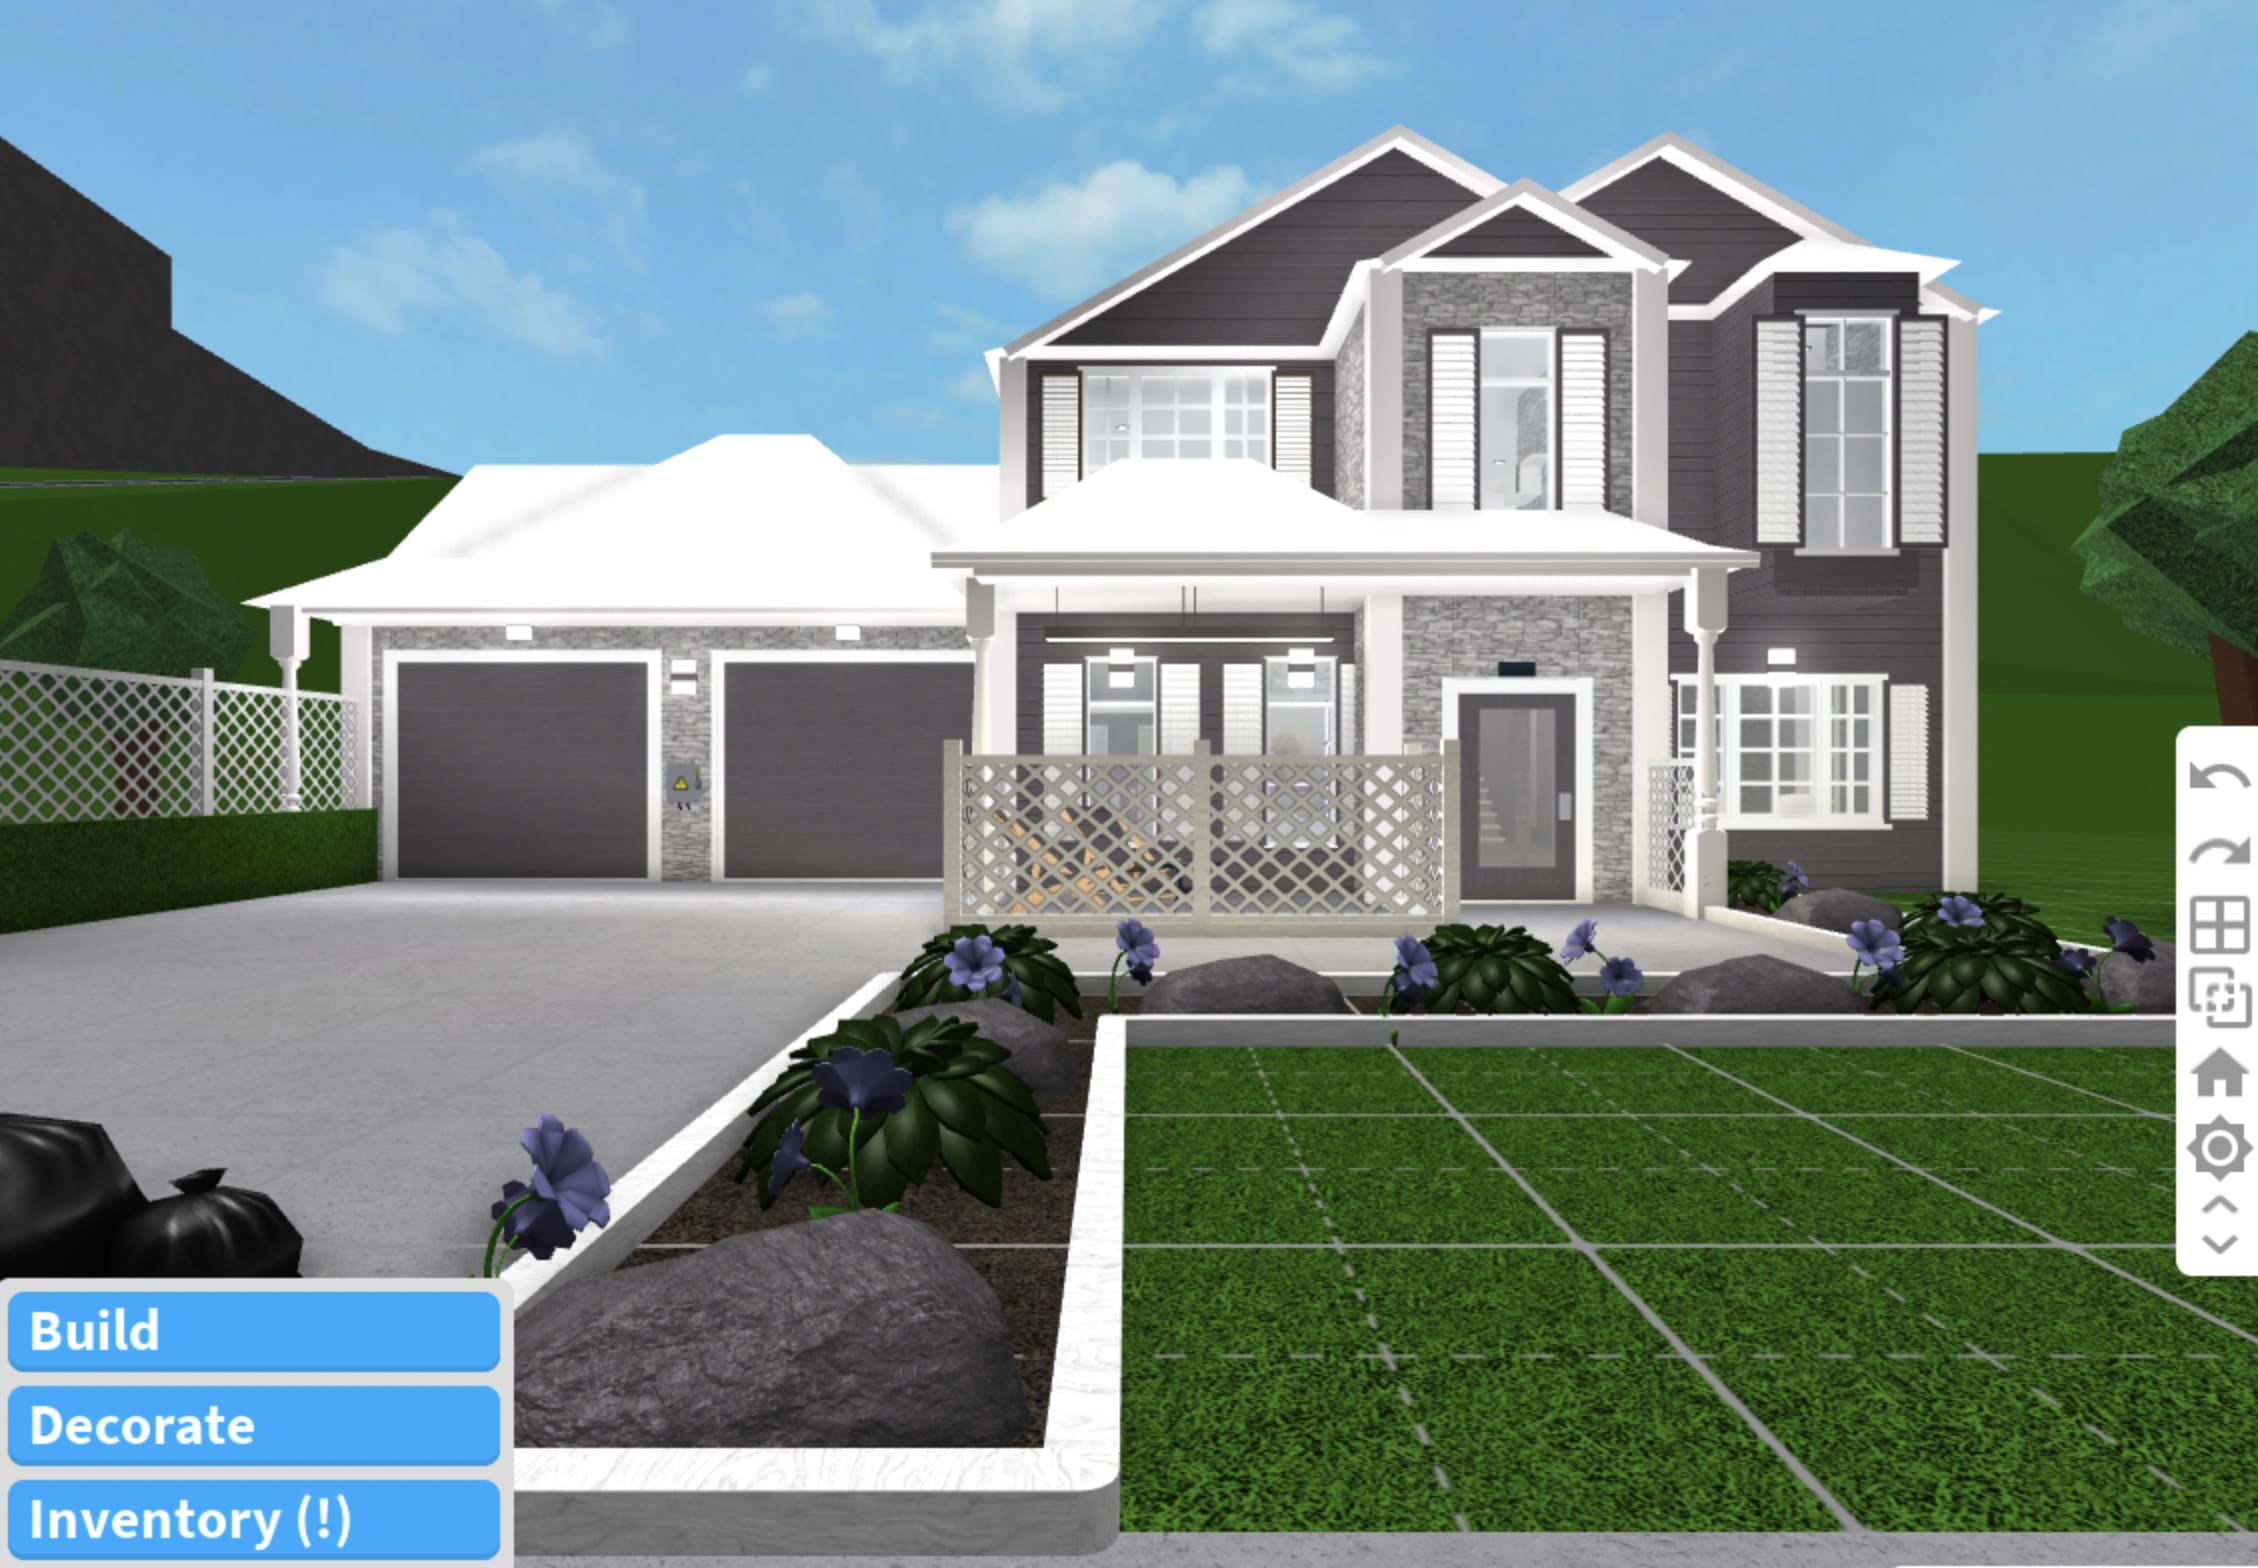 How To Build A Really Good House In Bloxburg - Garden and Modern House